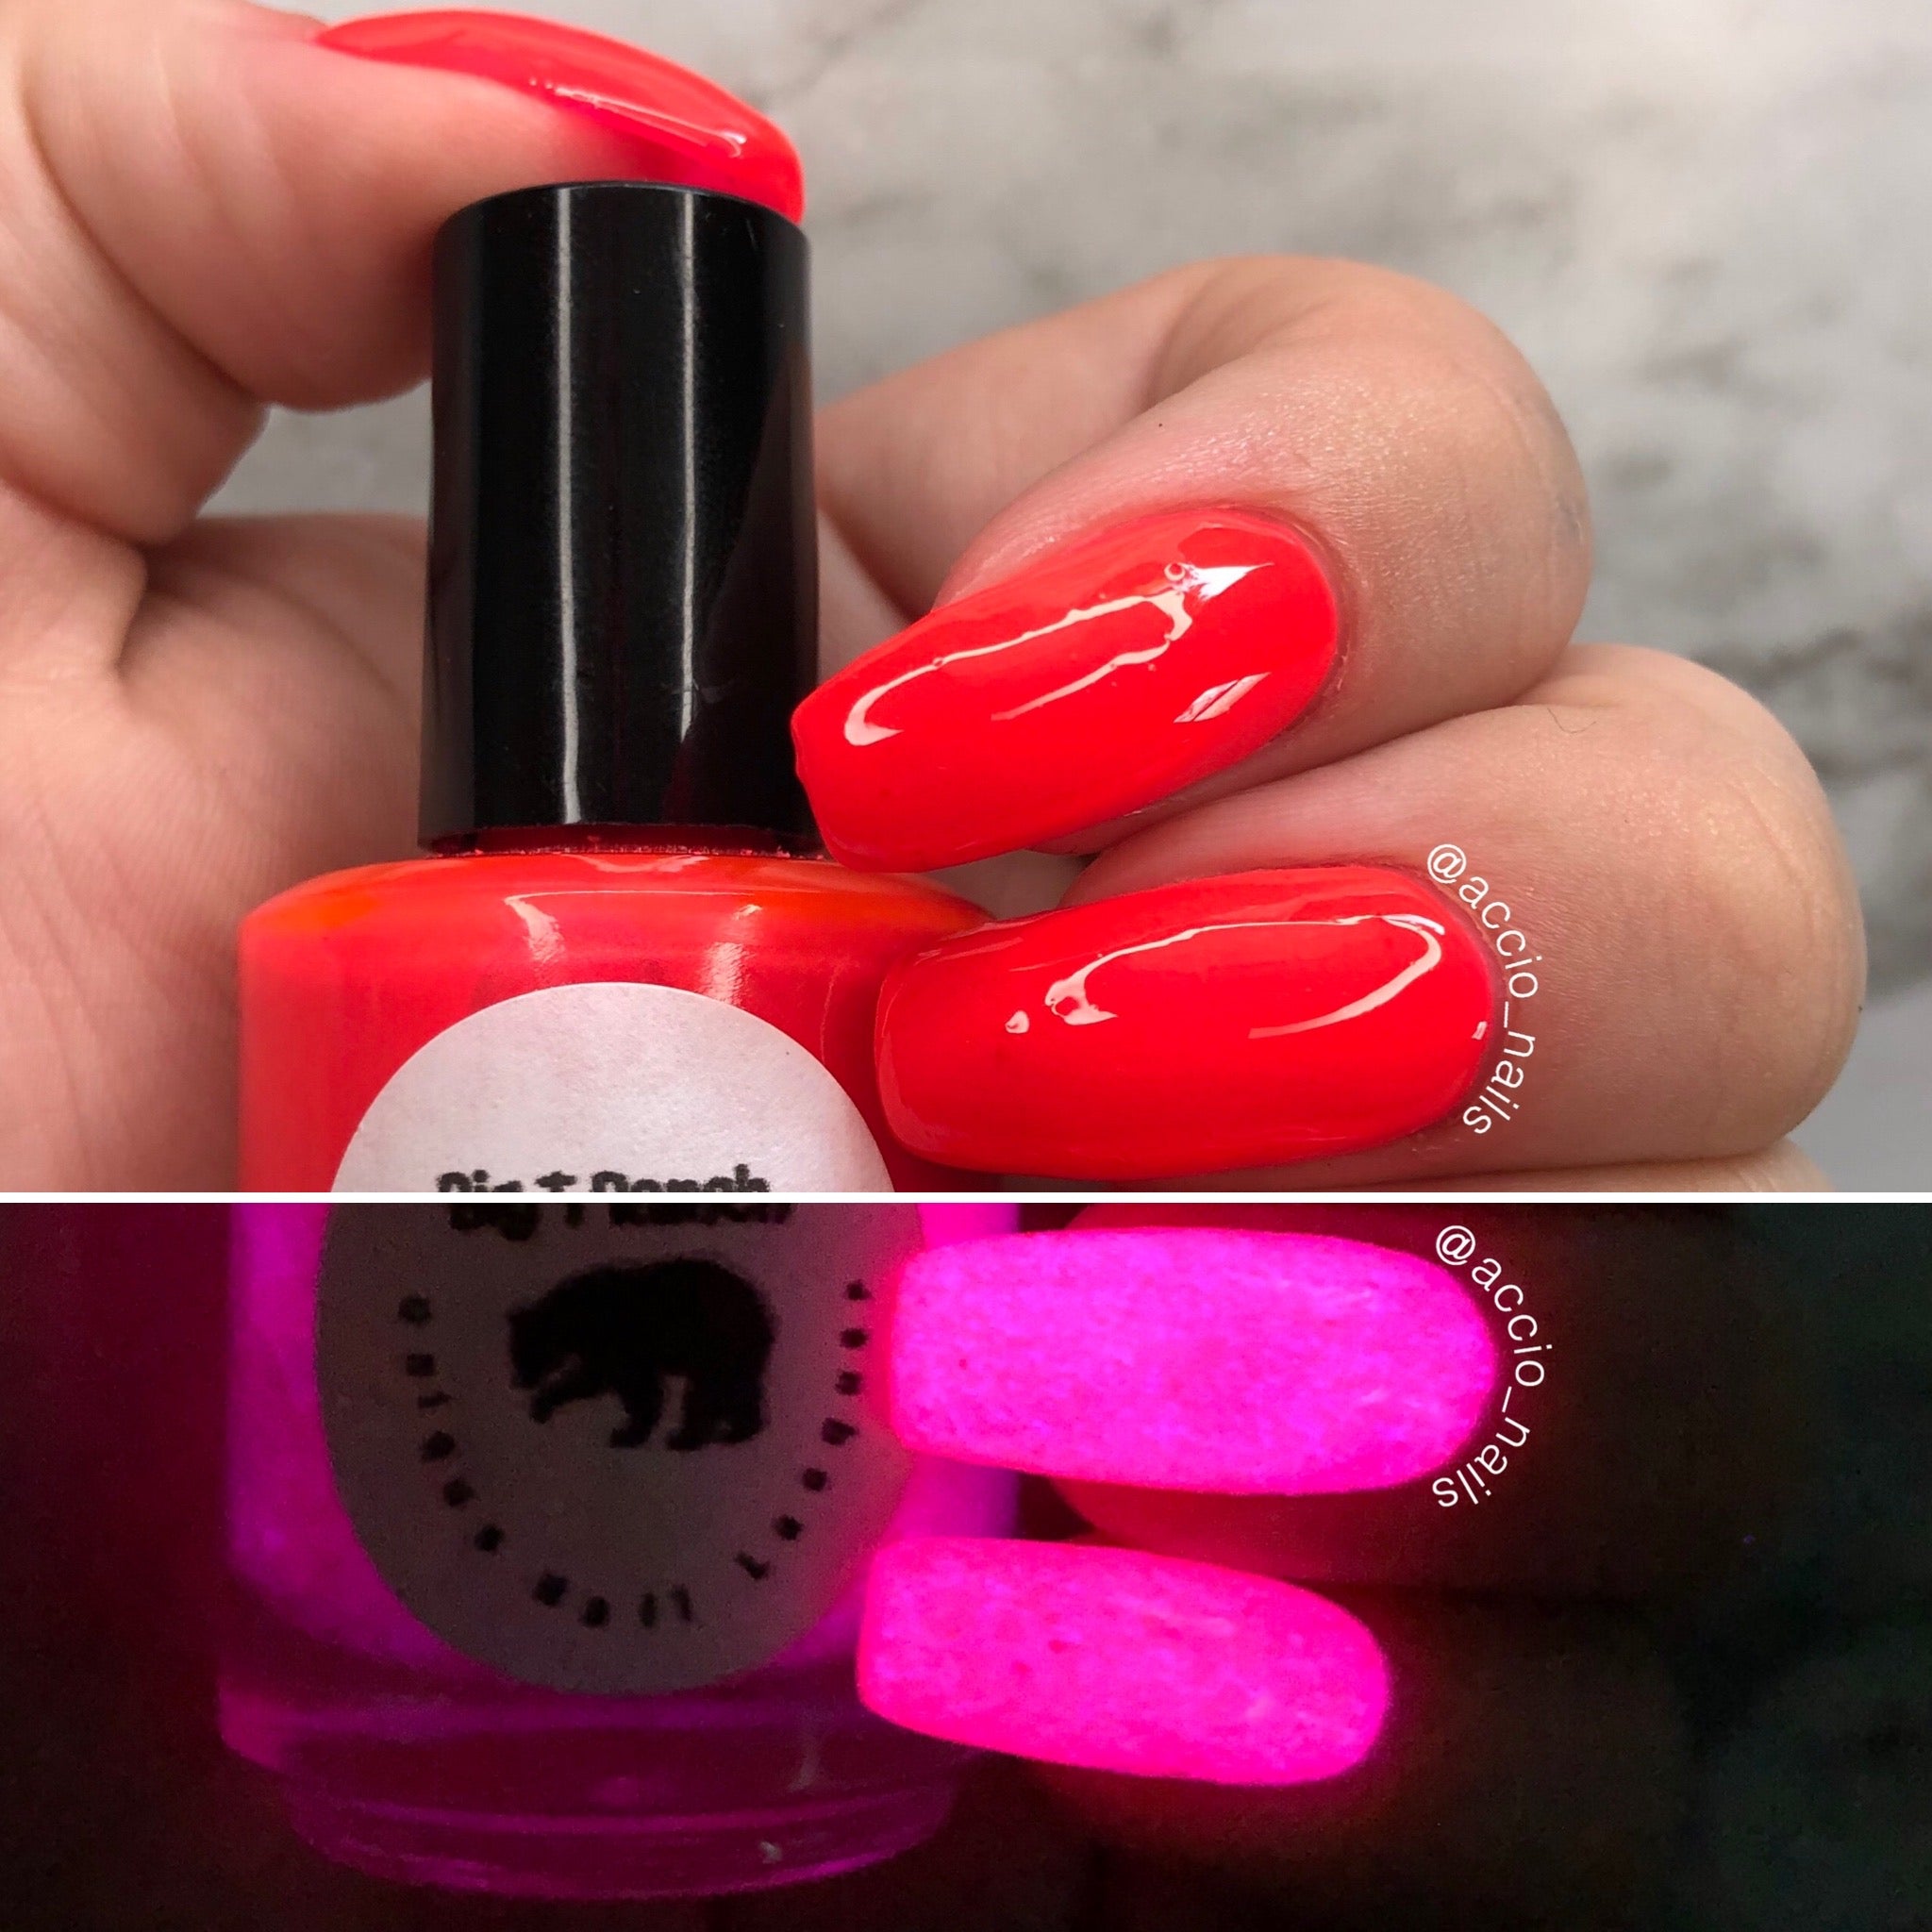 Glow-in-the-Dark Nail Polish, Rose Red, Glows Pink, Pink Moon, Custom  Blended, Glow Nails, FREE U.S. SHIPPING, Full Sized Bottle